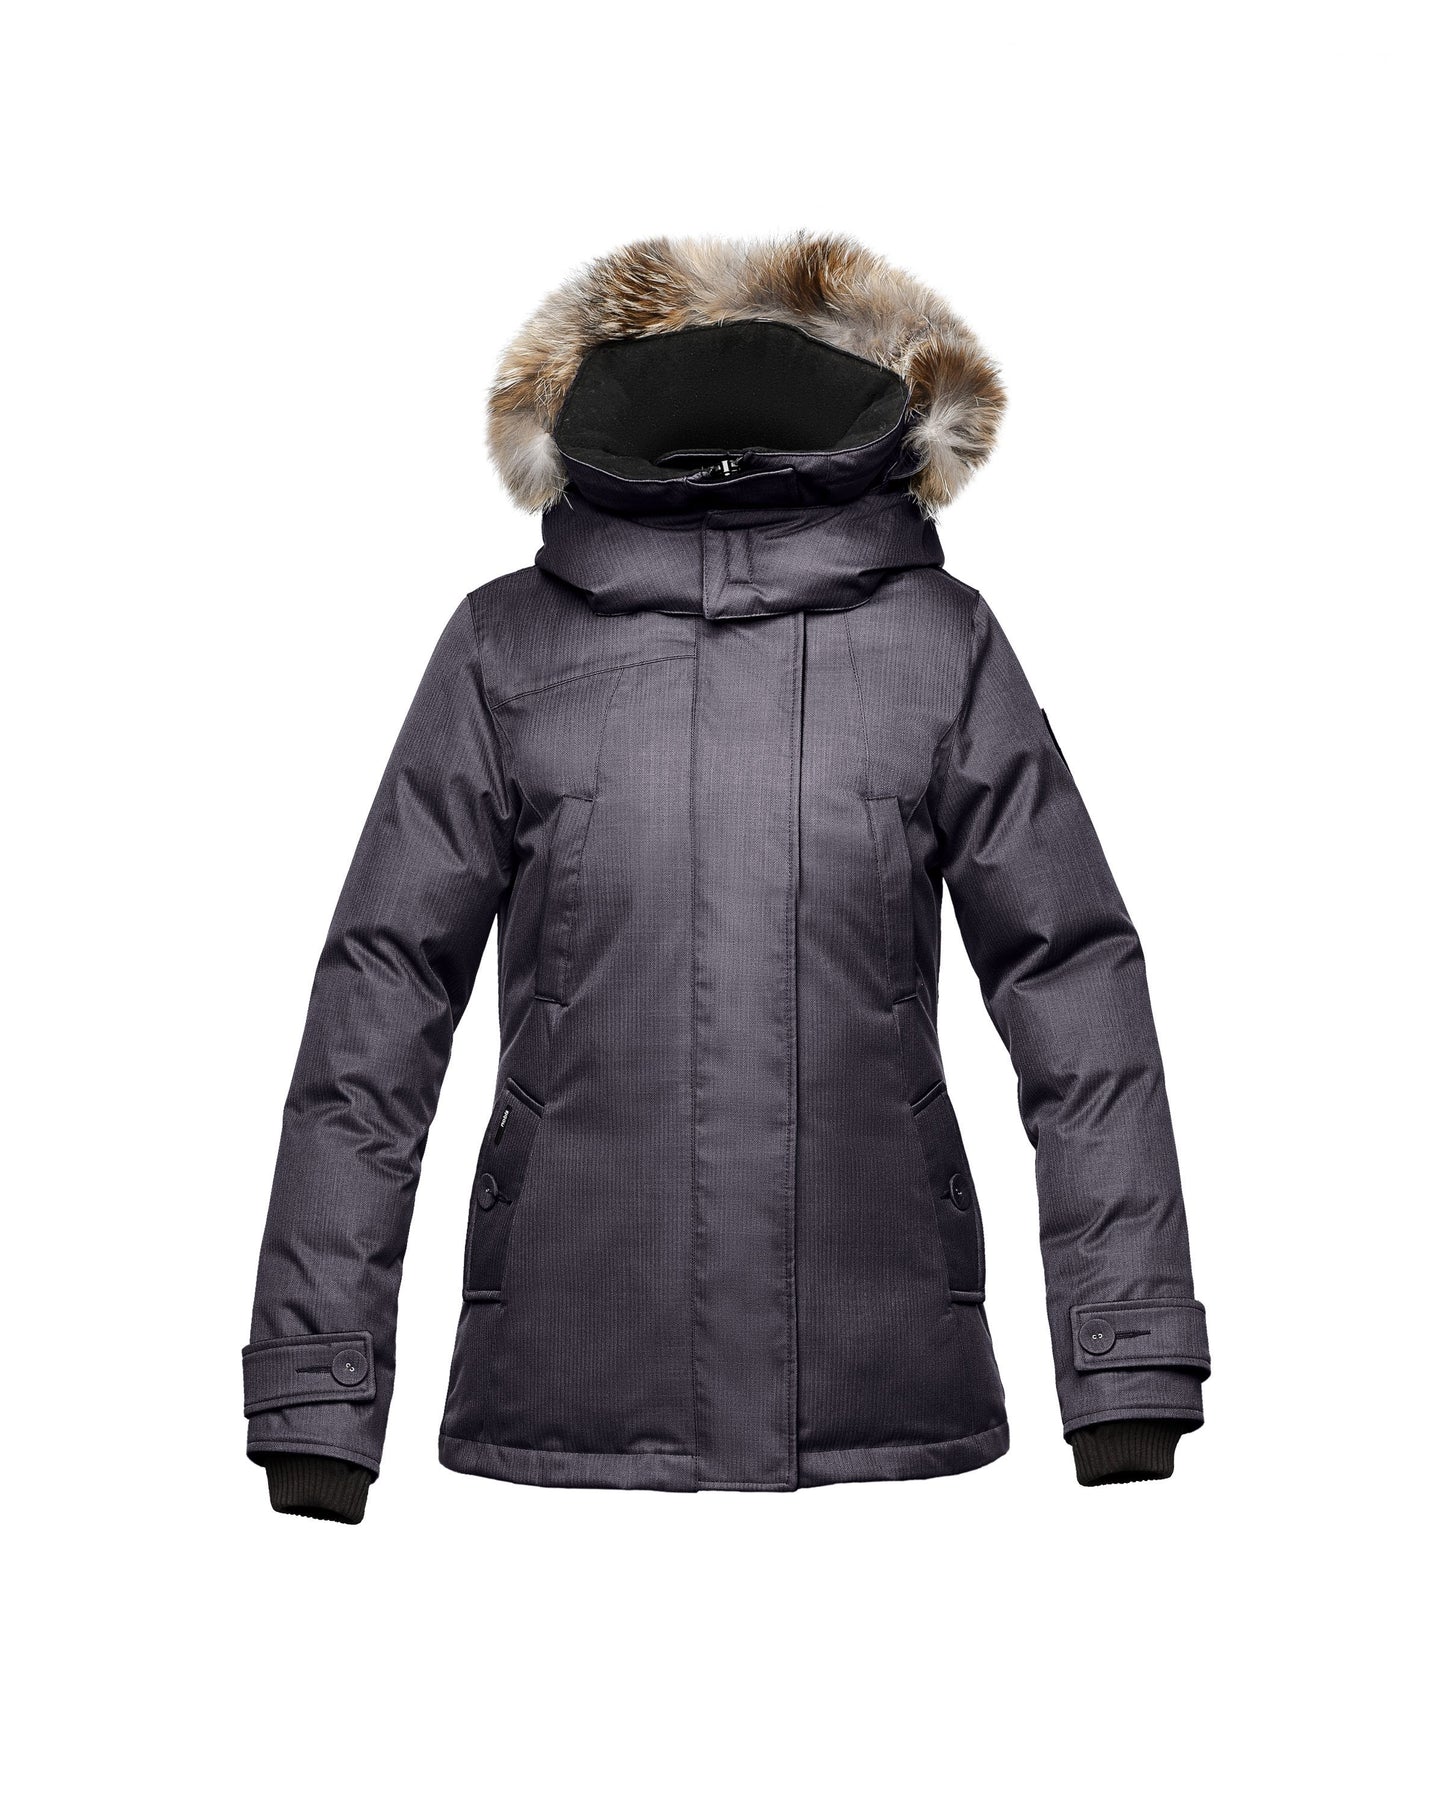 Women's down filled waist length parka with removable fur trim and removable hood in CH Purple